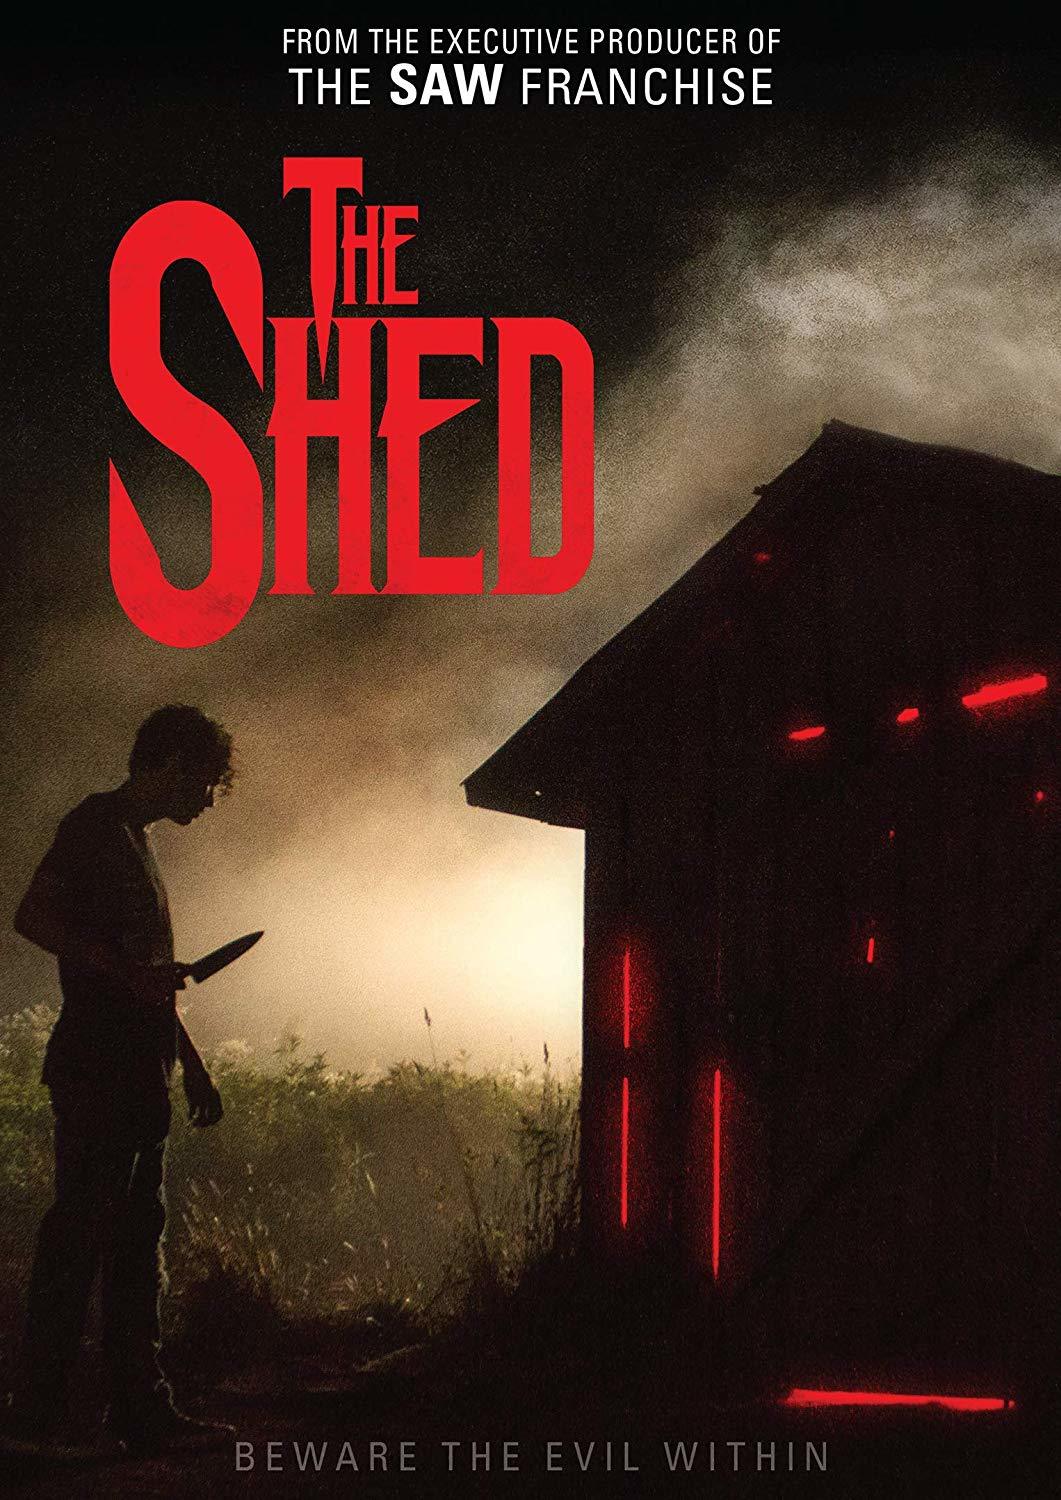 THE SHED DVD